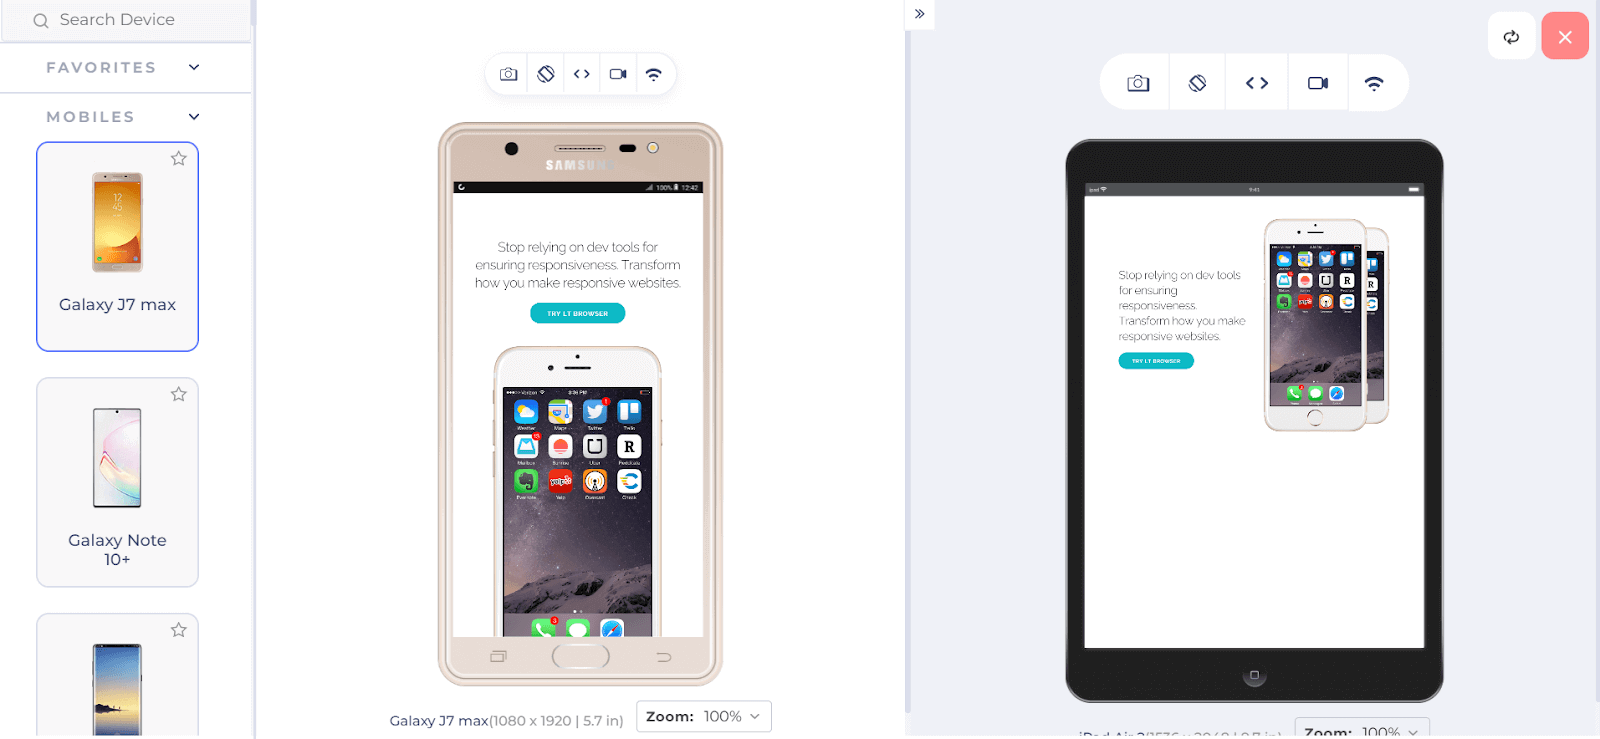 In smaller screens, both text and image stack vertically, and in larger screens, both stack side by side